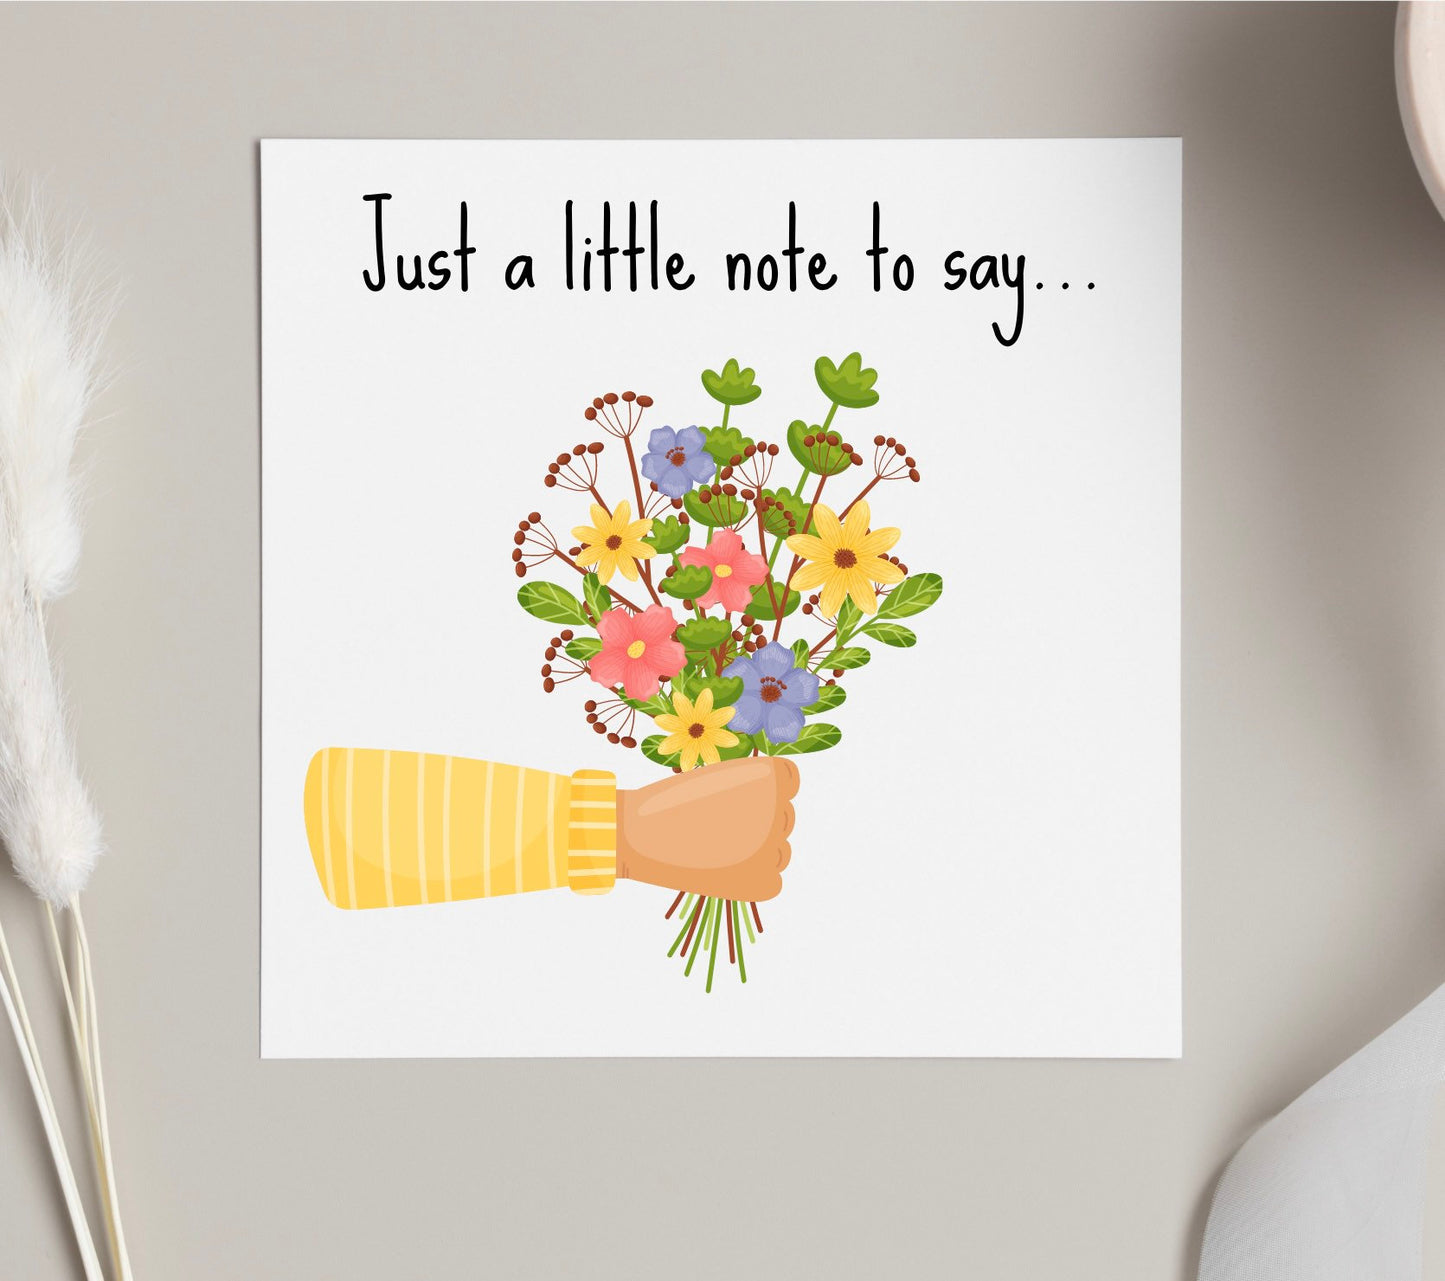 Just a little note to say greeting card, send flowers, flower card, send a friend good luck, thinking of you, tough times, thank you cards